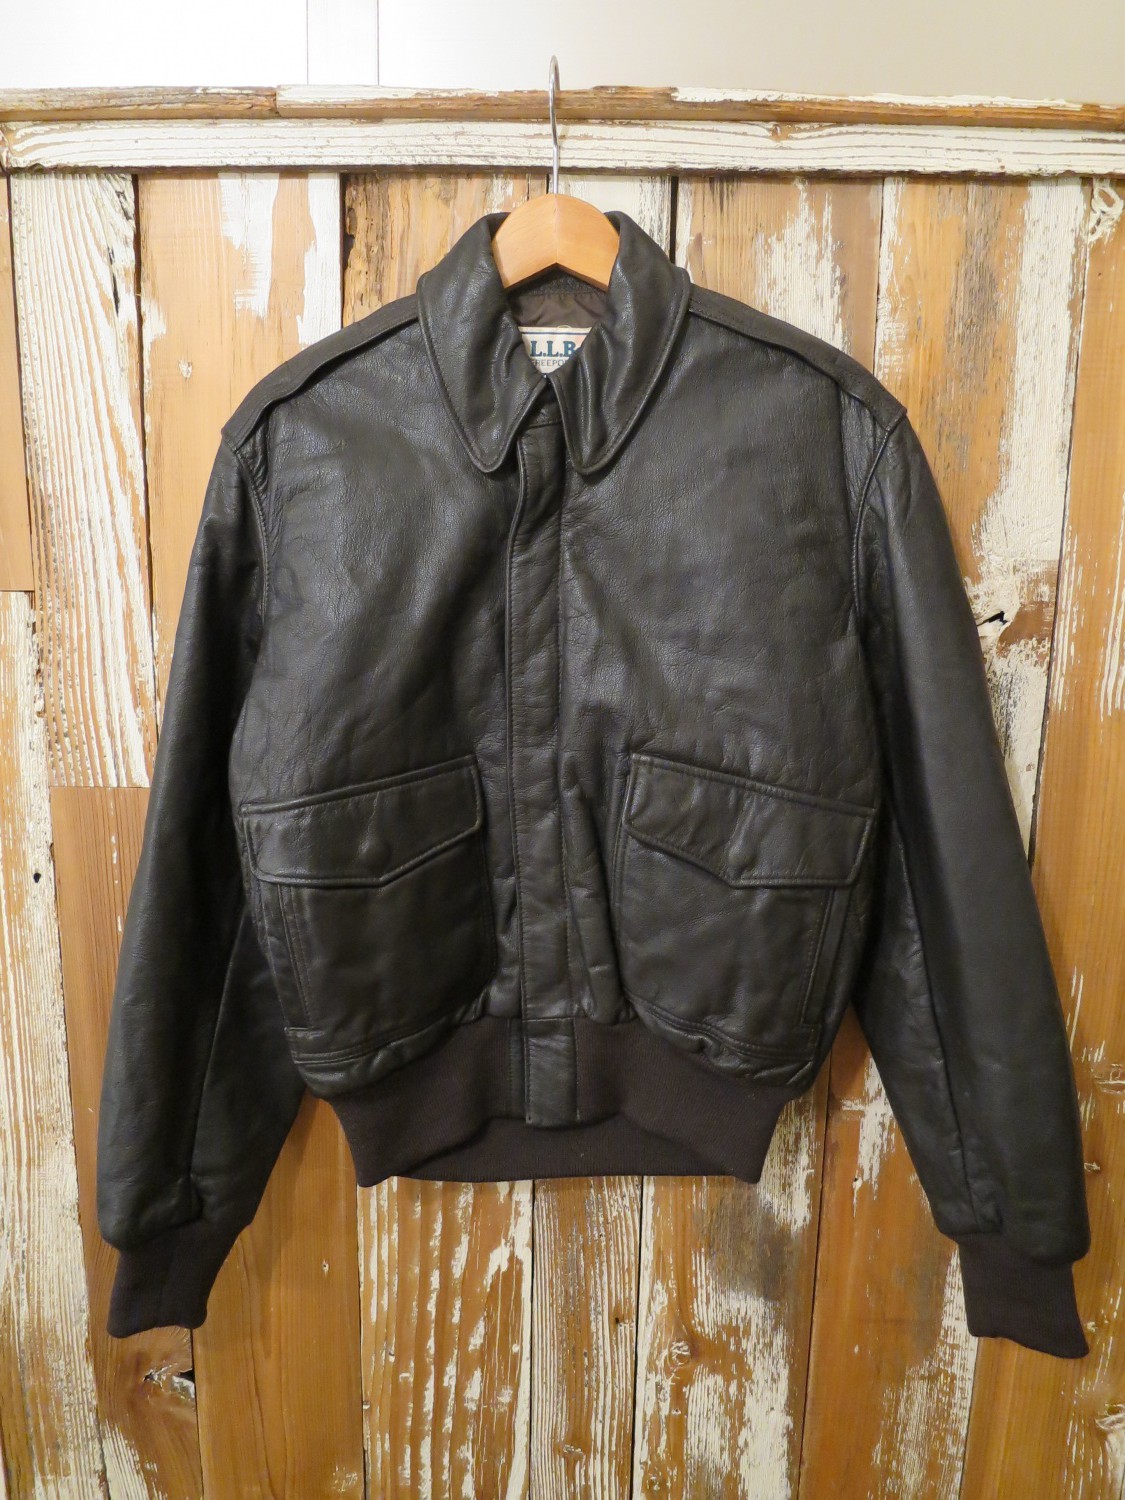 L.L.Bean / type A-2 Leather Jacket ： vintage & used clothing ROGER'S